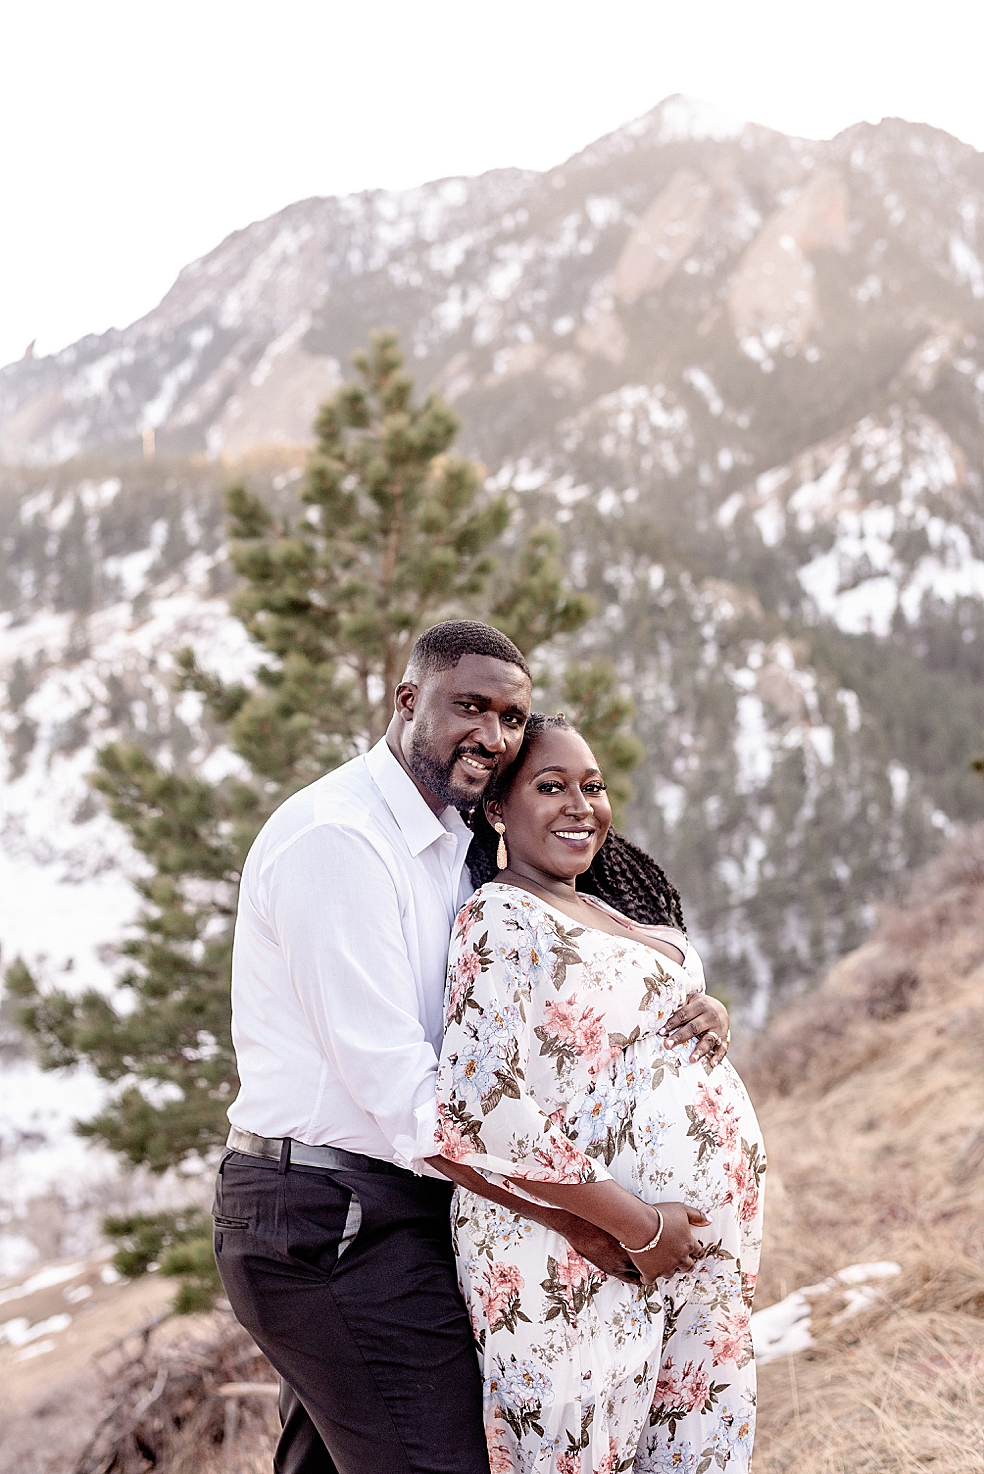 Mom and dad smiling together while holding moms belly | Photo by Jessica Lee Photography